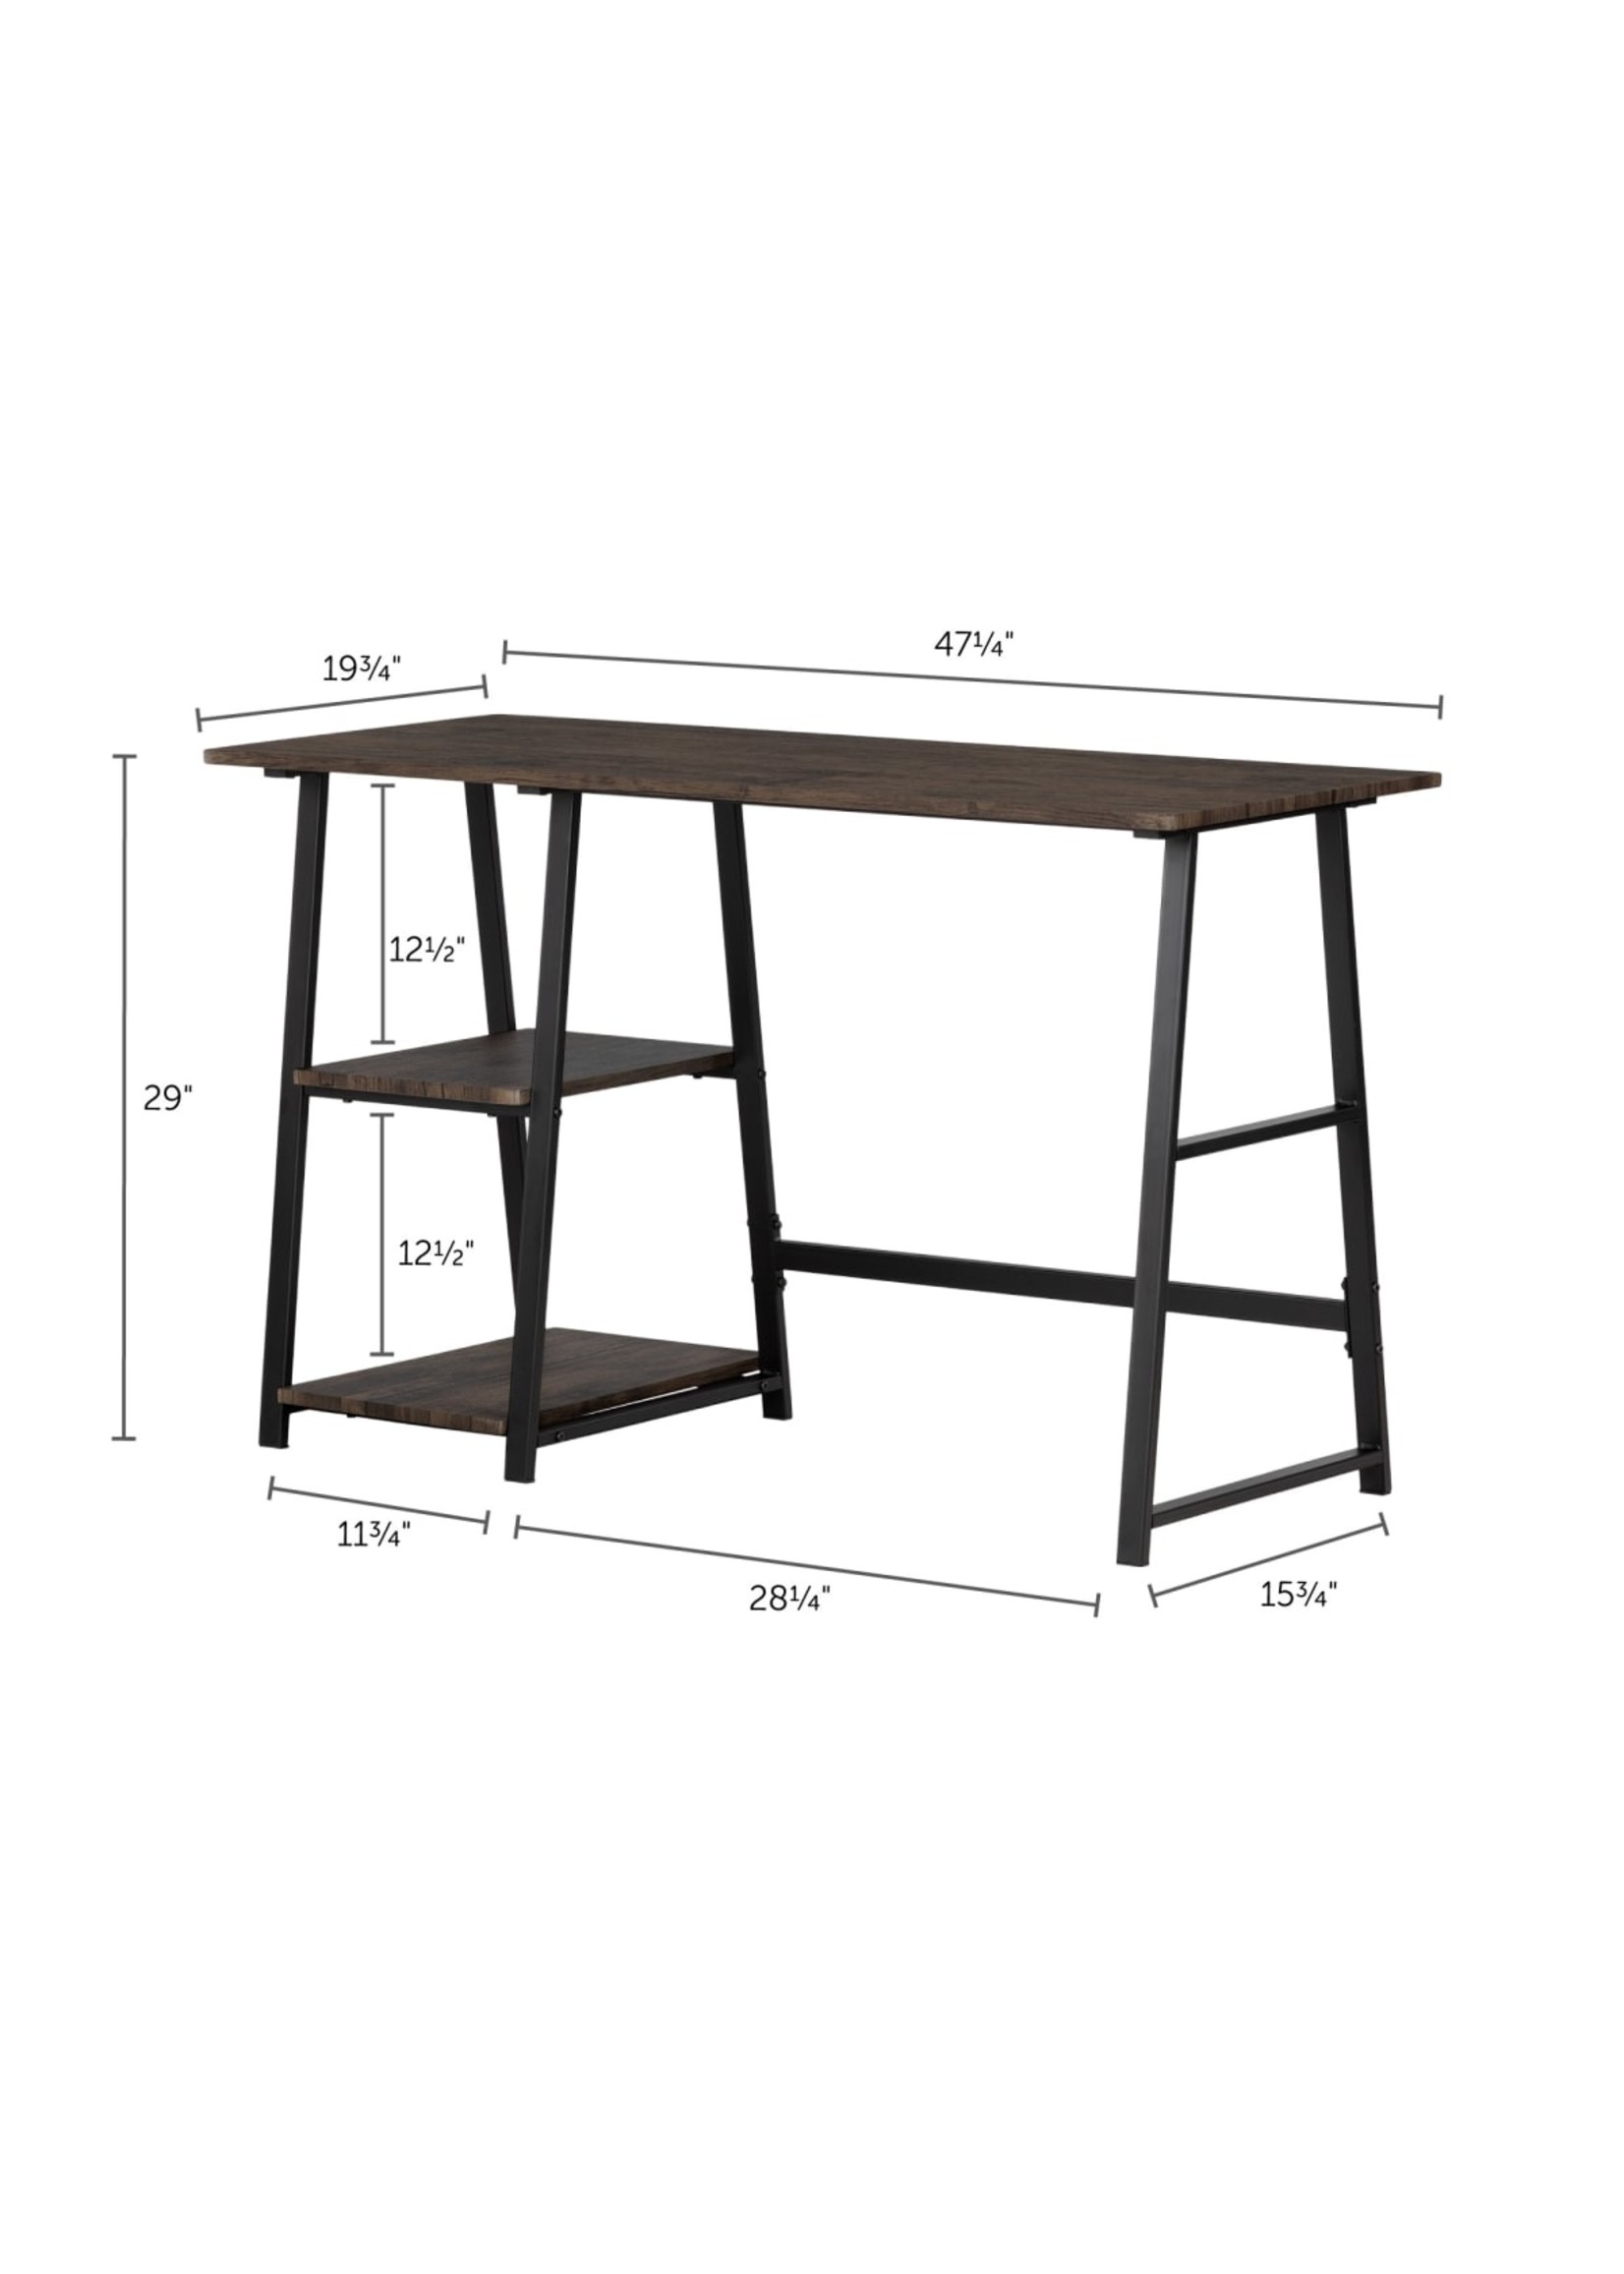 SOUTH SHORE Evane Industrial Desk with Storage Fall Oak